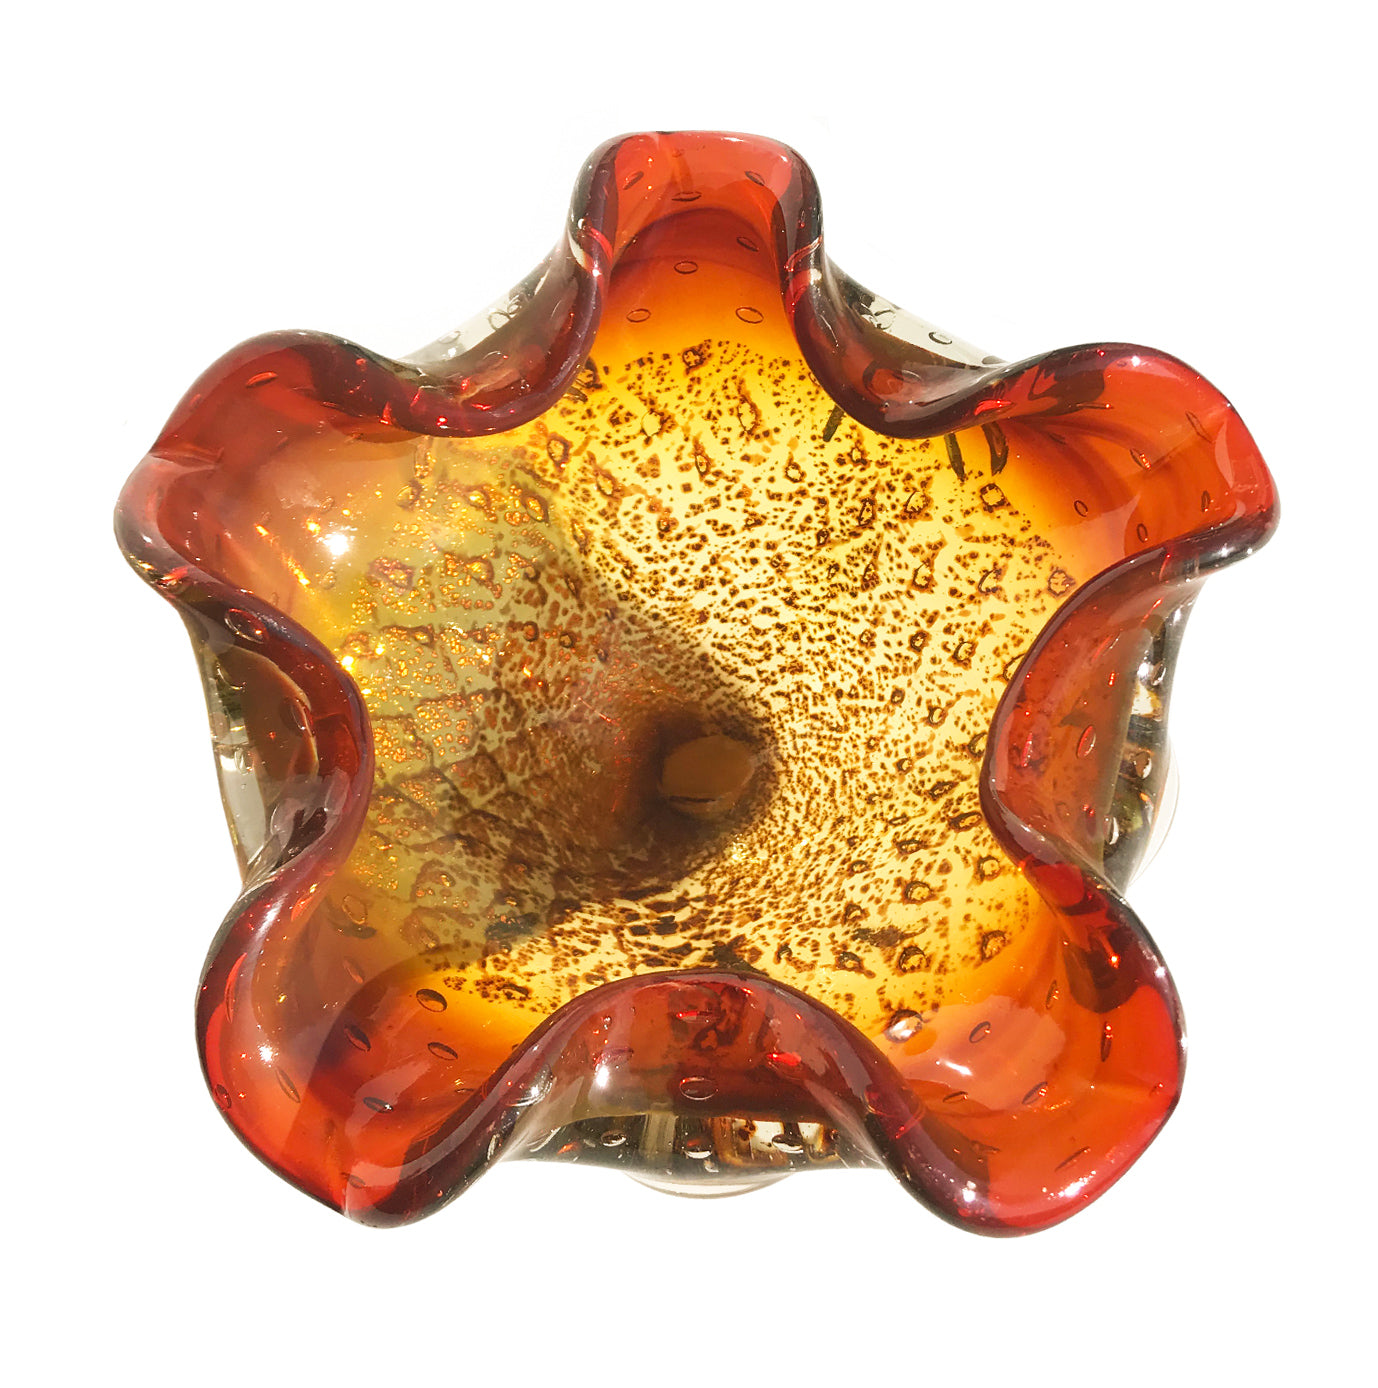 Murano Art Glass bowl, with a fantastic firey mix of colour. Deep oranges, yellows, browns & golden flecks swirl and sparkle in the light making this art bowl a real corker - SHOP NOW - www.intovintage.co.uk